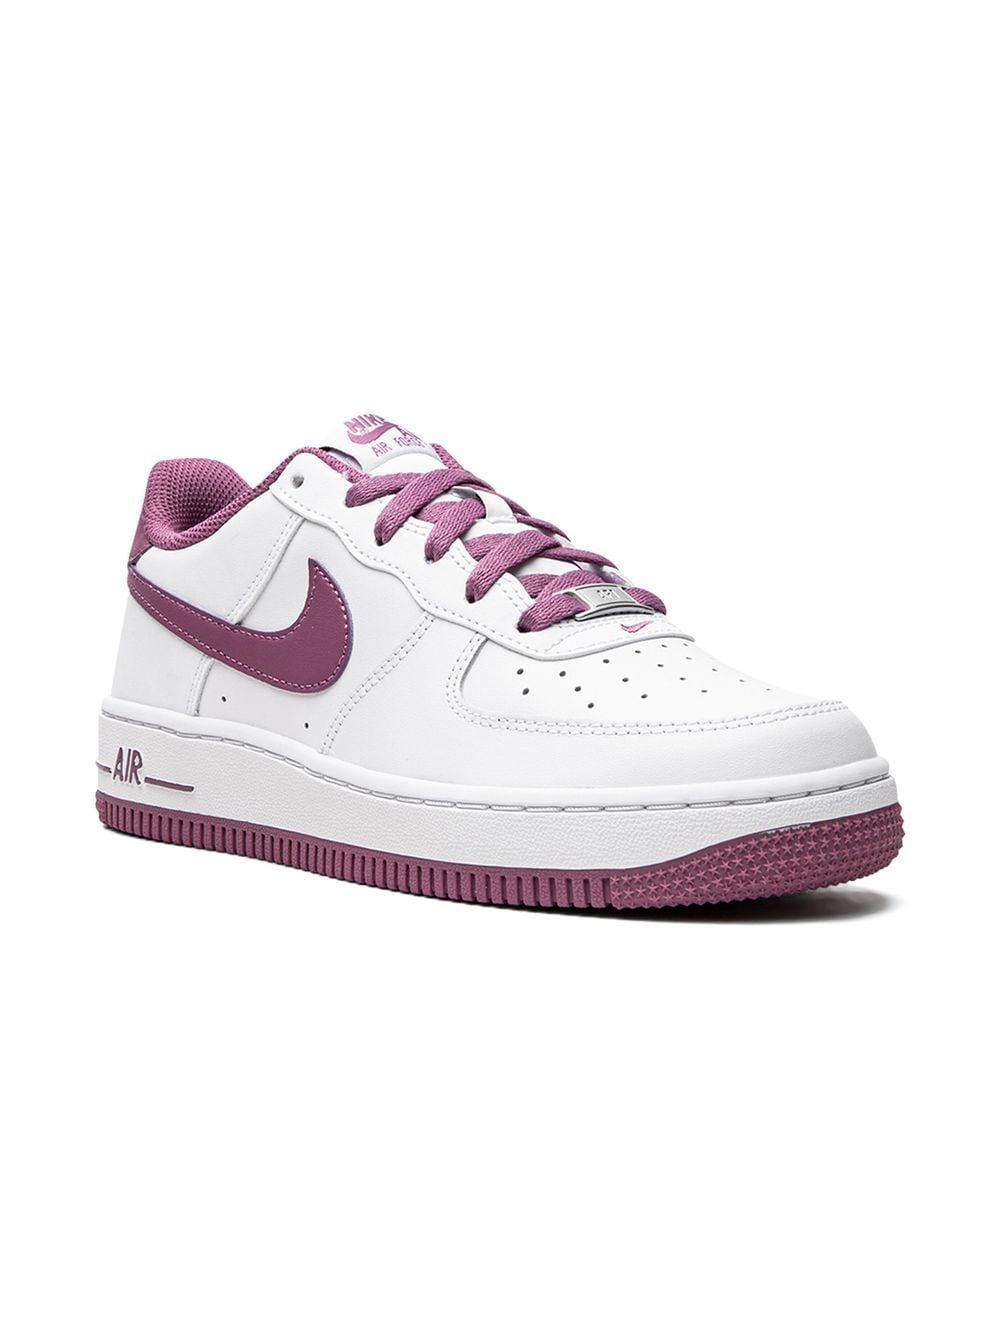 Image 2 of Nike Kids Air Force 1 Low ''White Mauve'' sneakers